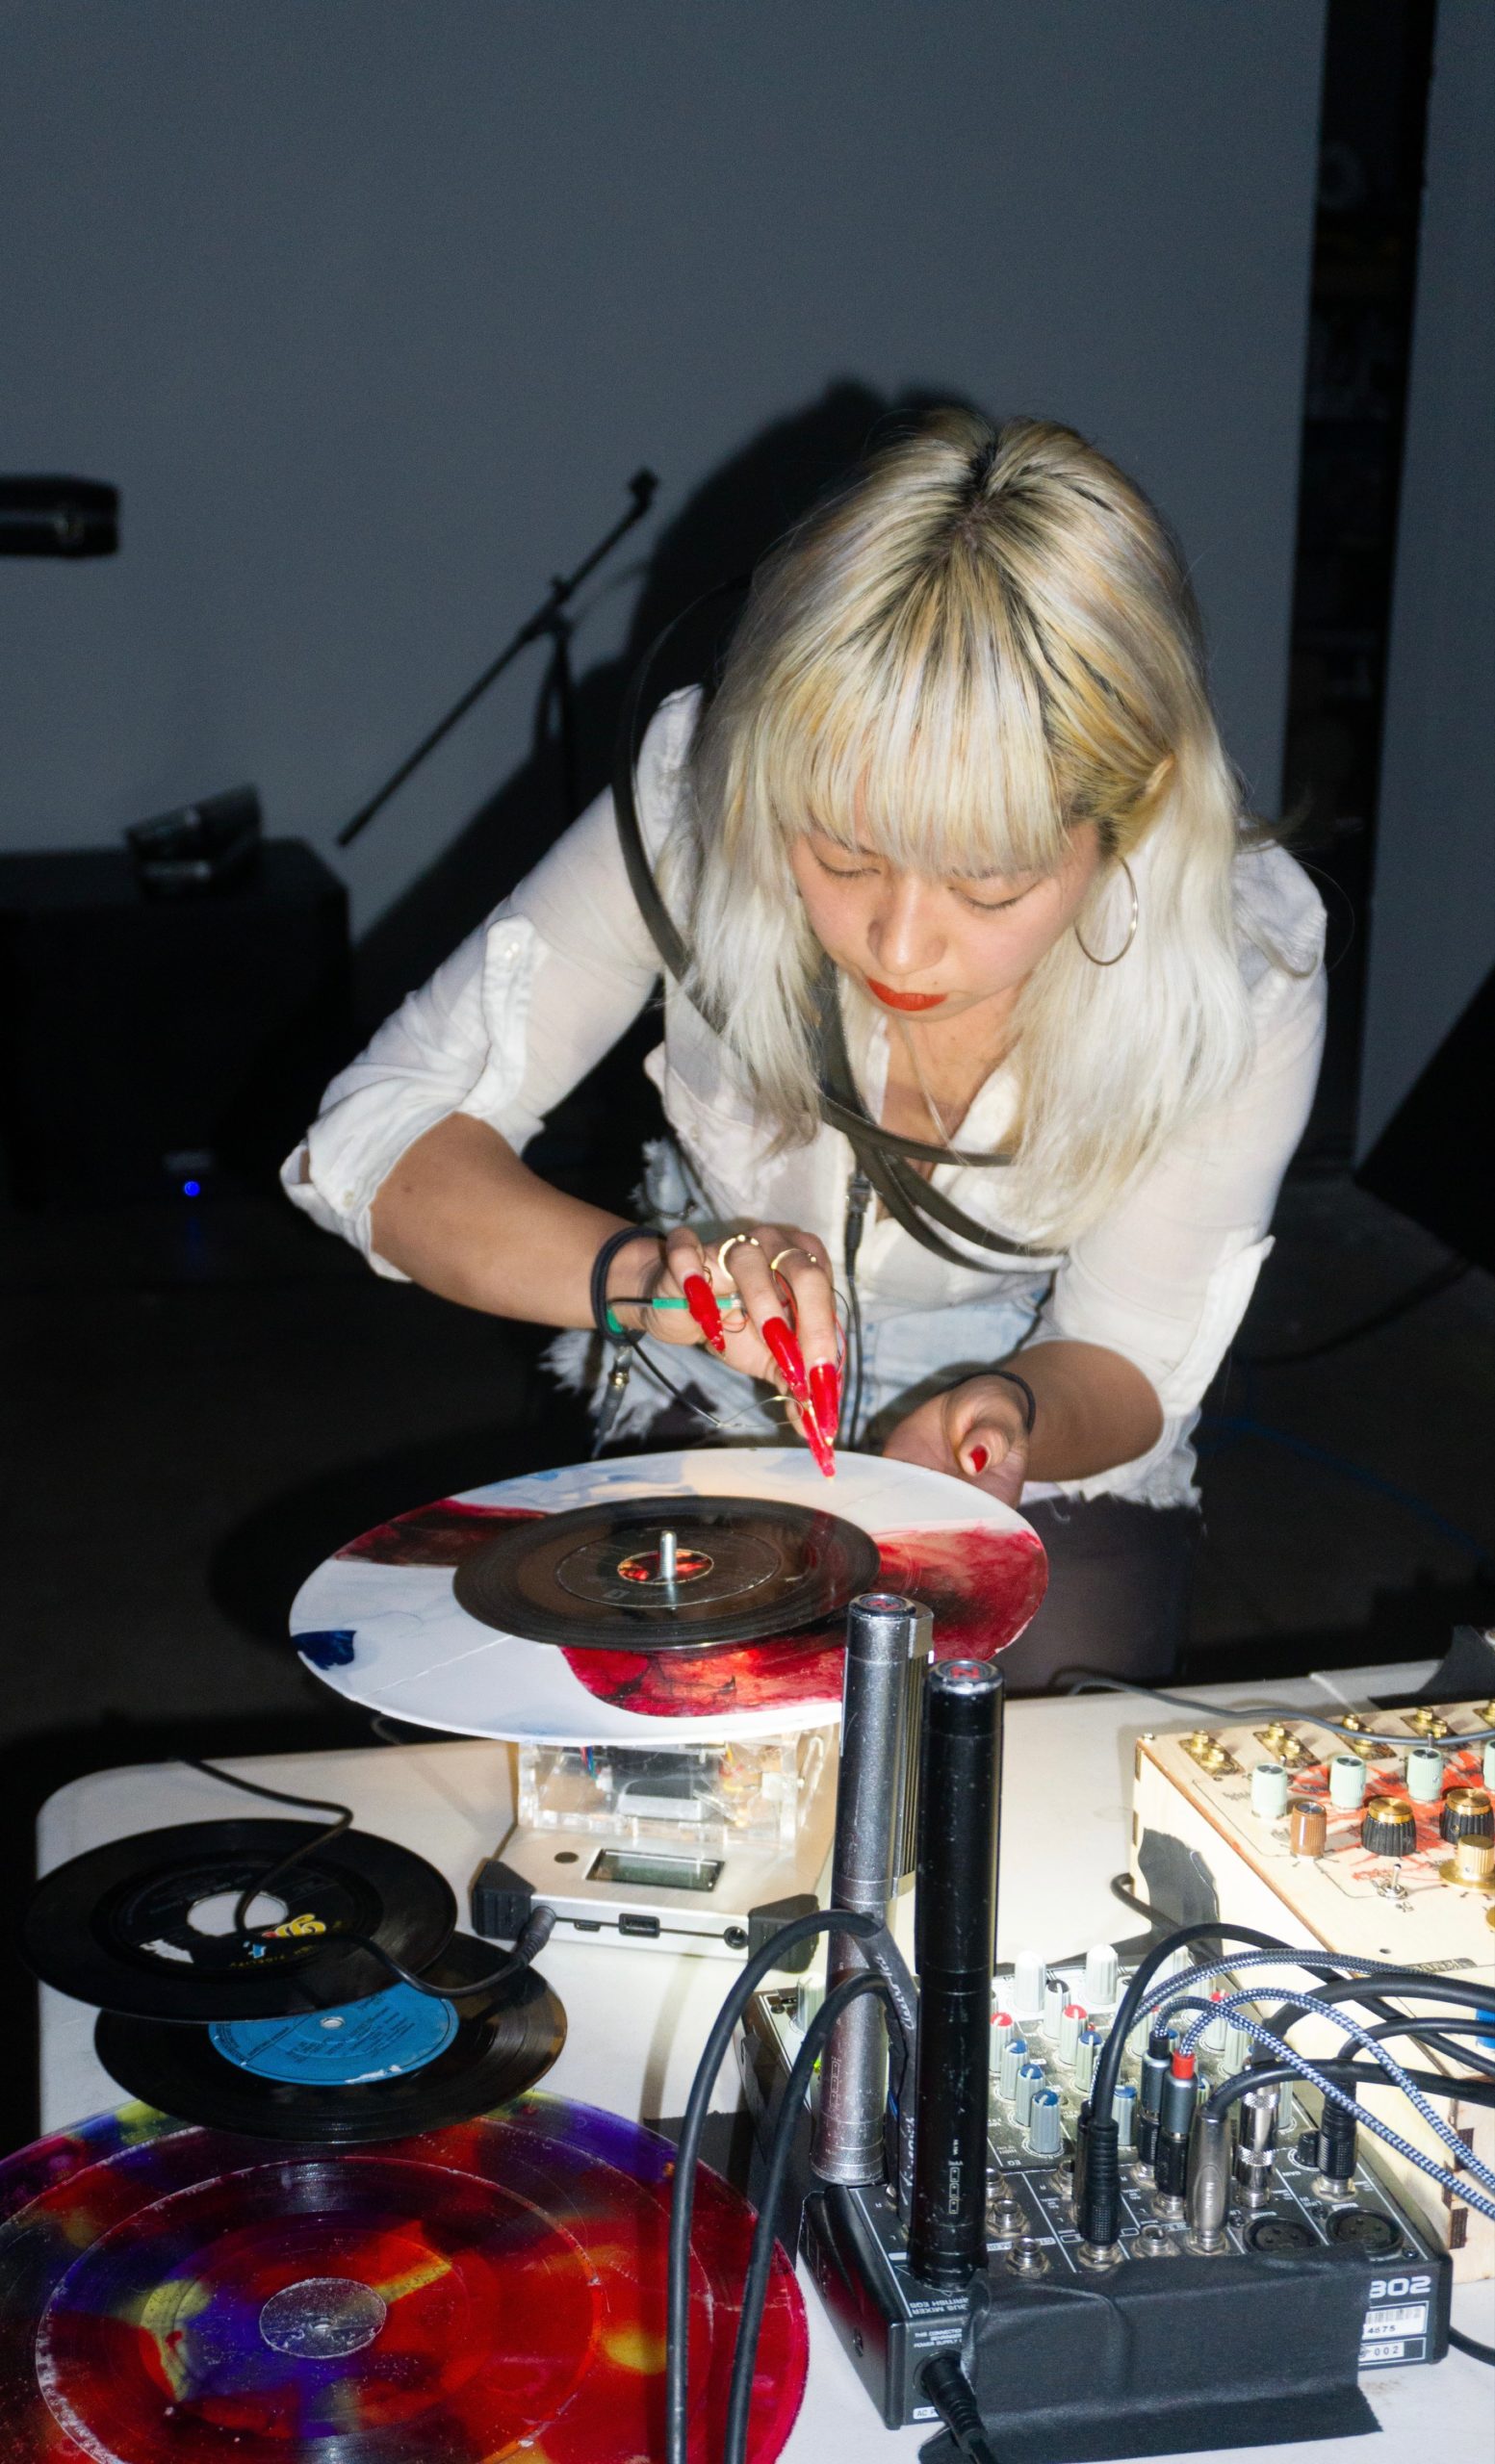 Victoria Shen scratching a record with her needle nails on a handmade turntable.